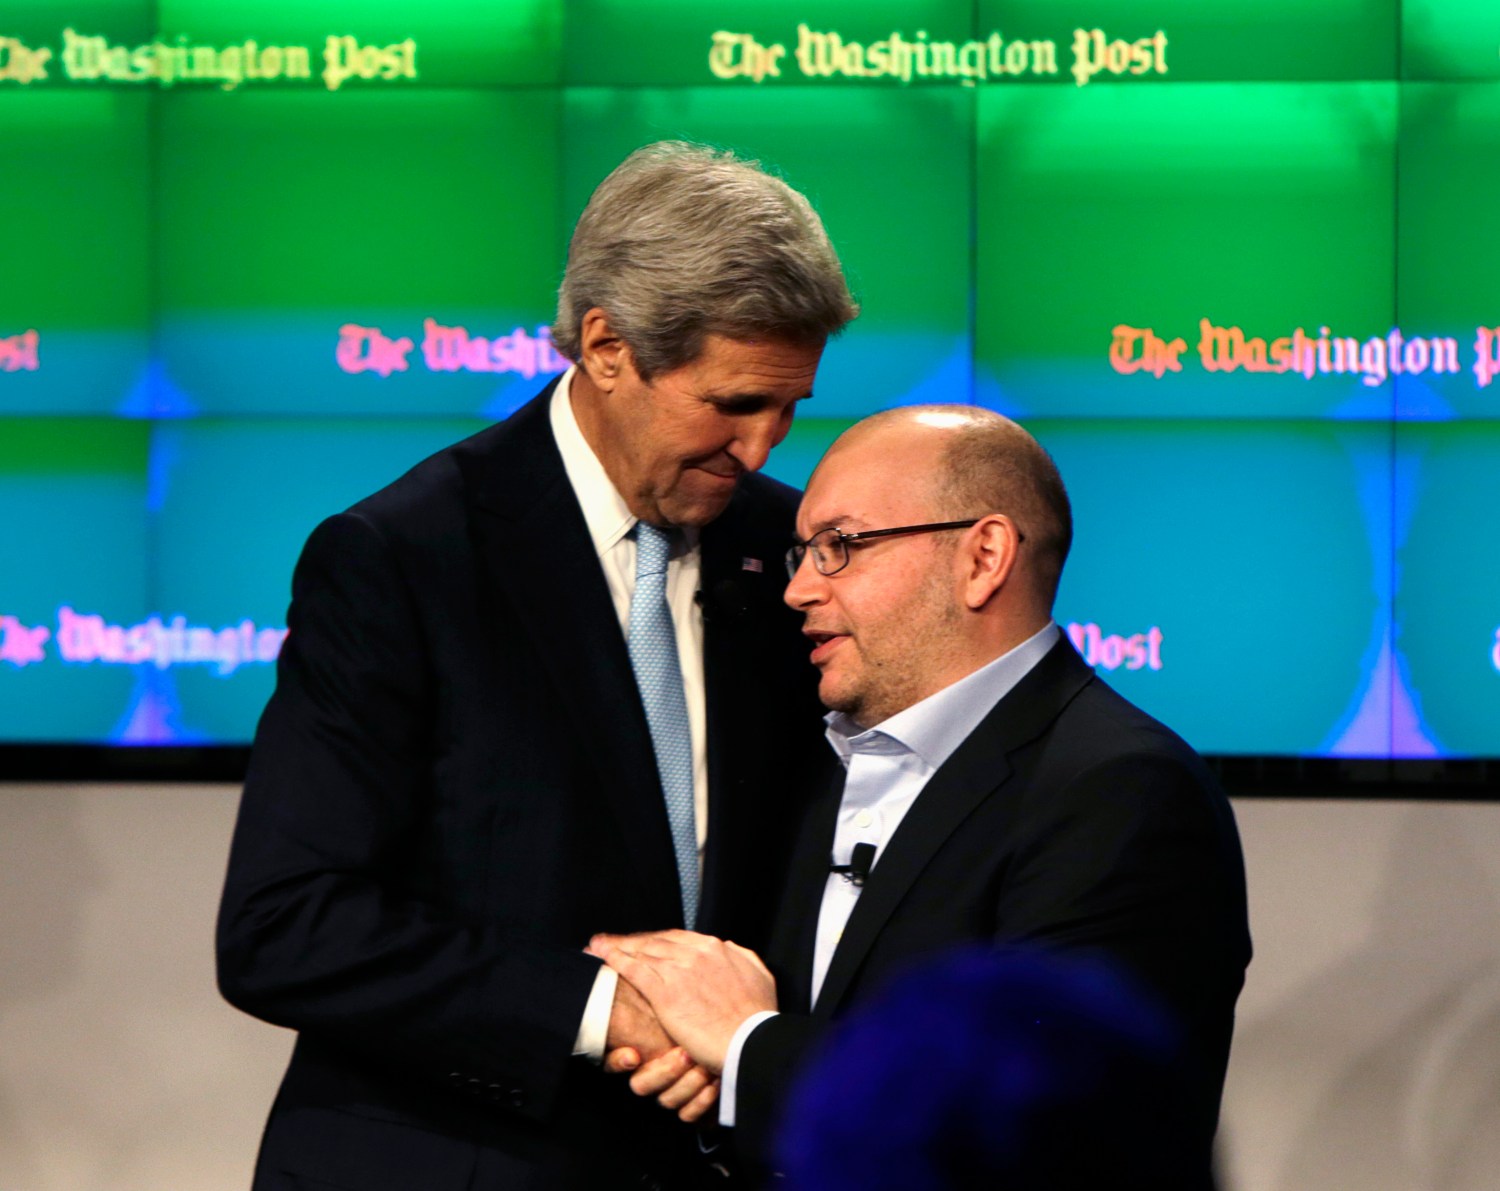 Washington Post reporter Jason Rezaian (R) is greeted by U.S. Secretary of State John Kerry at the grand opening of the Washington Post newsroom in Washington January 28, 2016. Rezaian was recently released from 18 months of captivity in Iran. REUTERS/Gary Cameron - RTX24FQ1